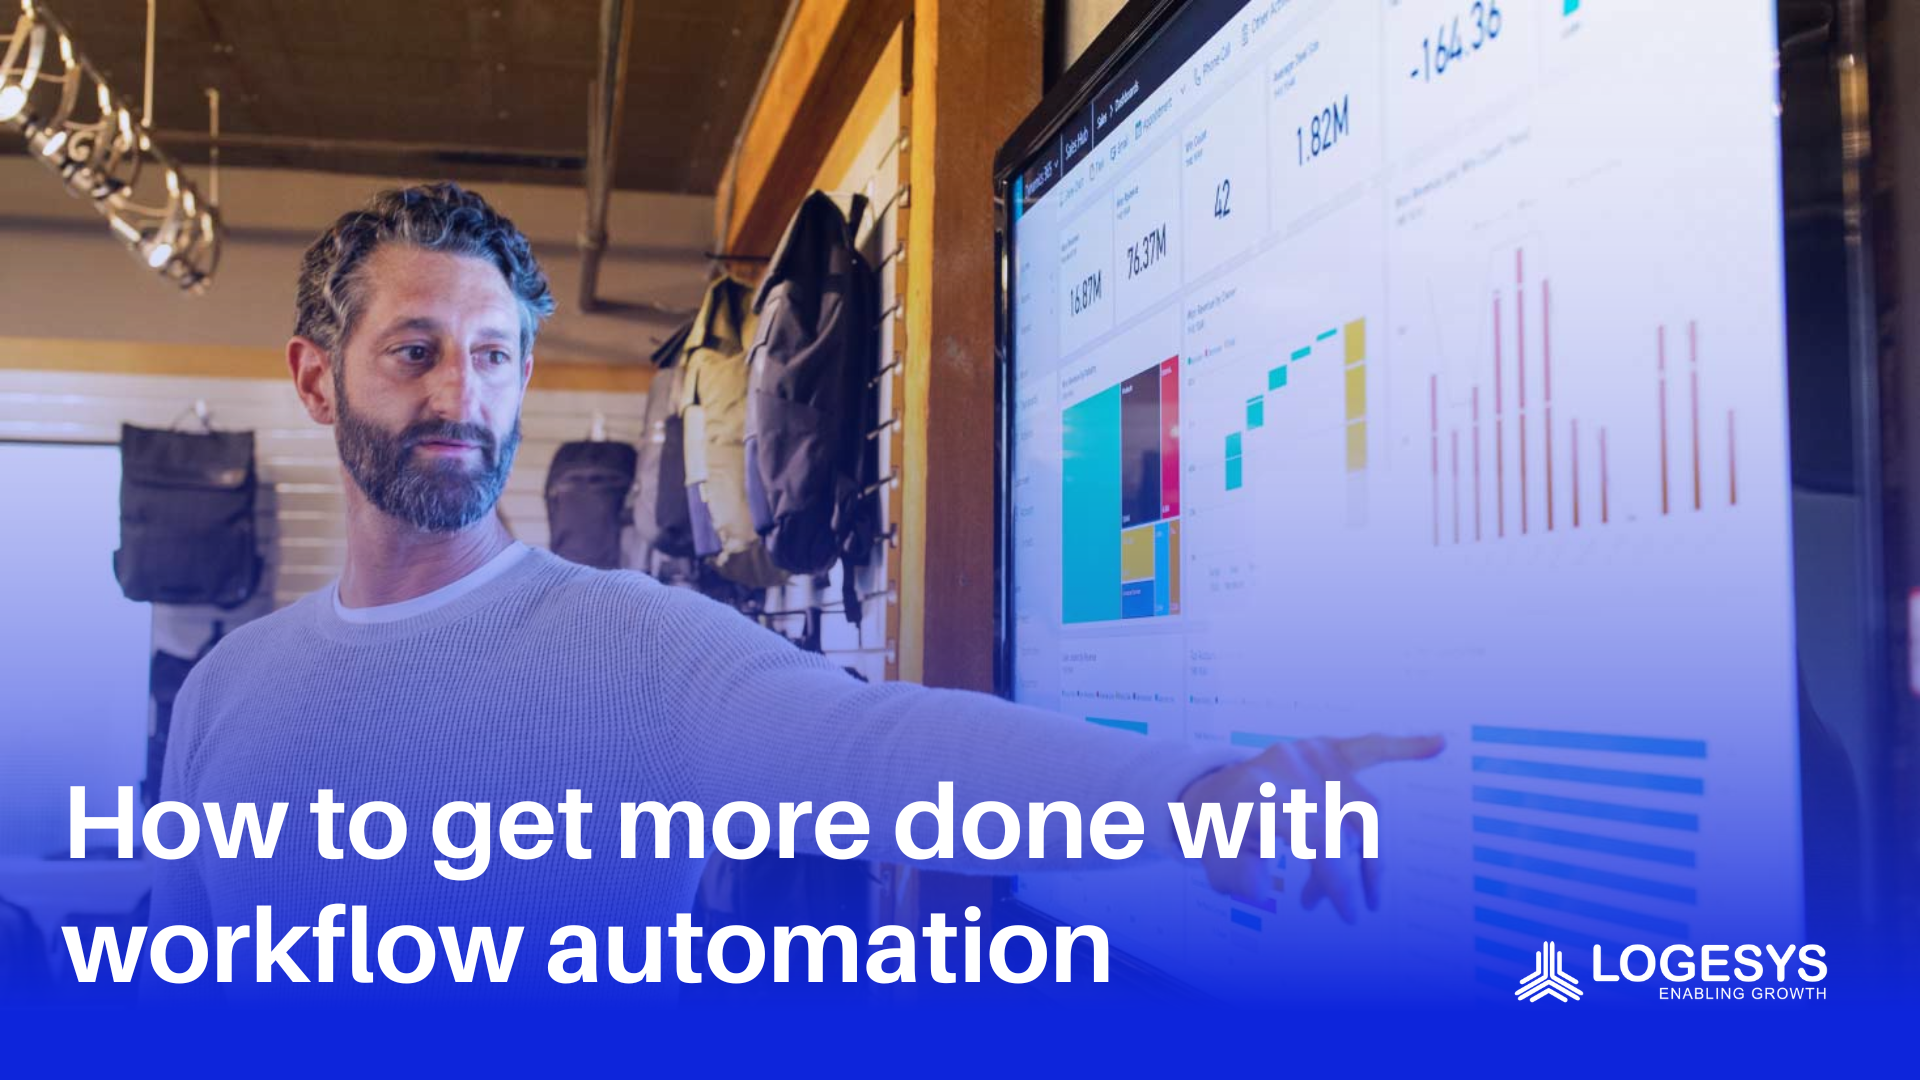 How Workflow Automation Can Help You Get More Done 